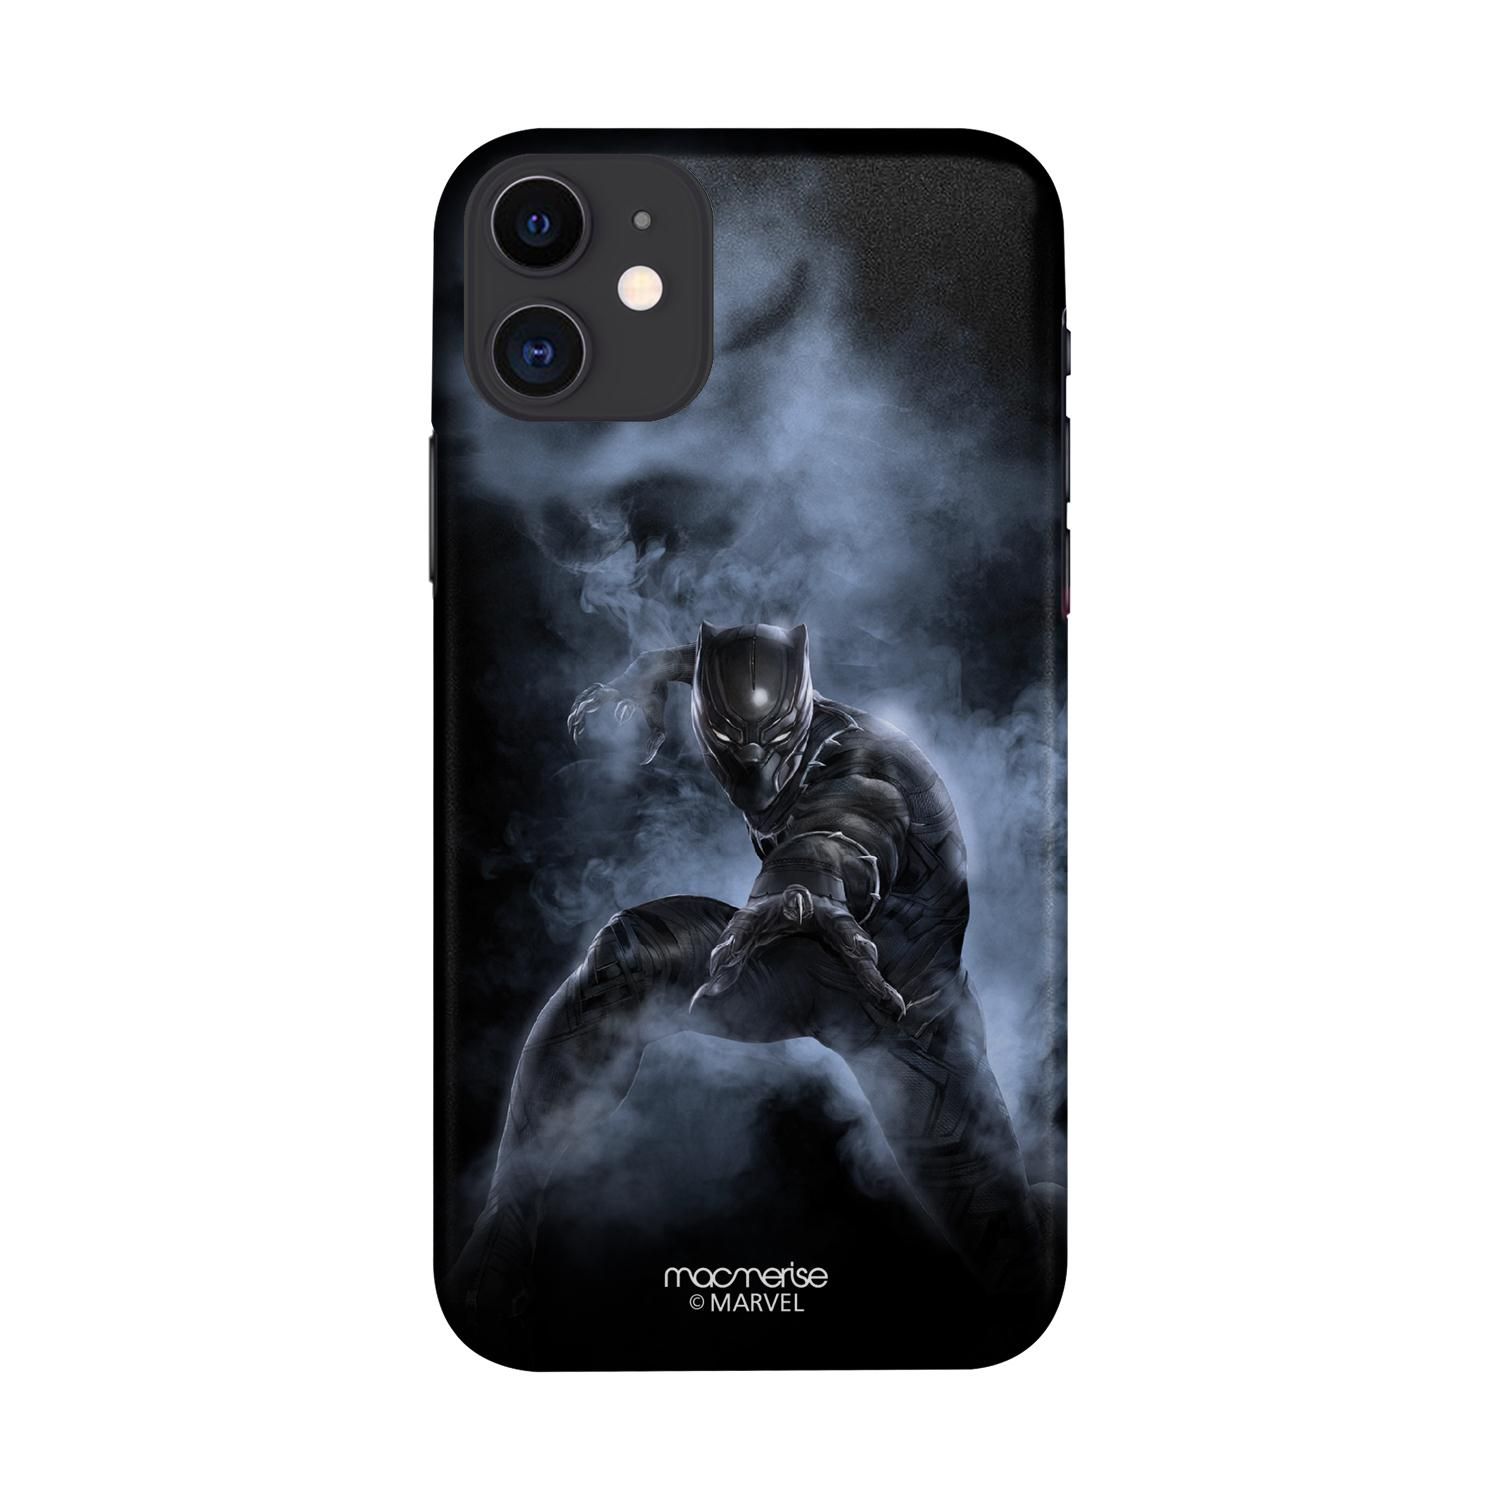 Buy Black Panther Attack - Sleek Phone Case for iPhone 11 Online